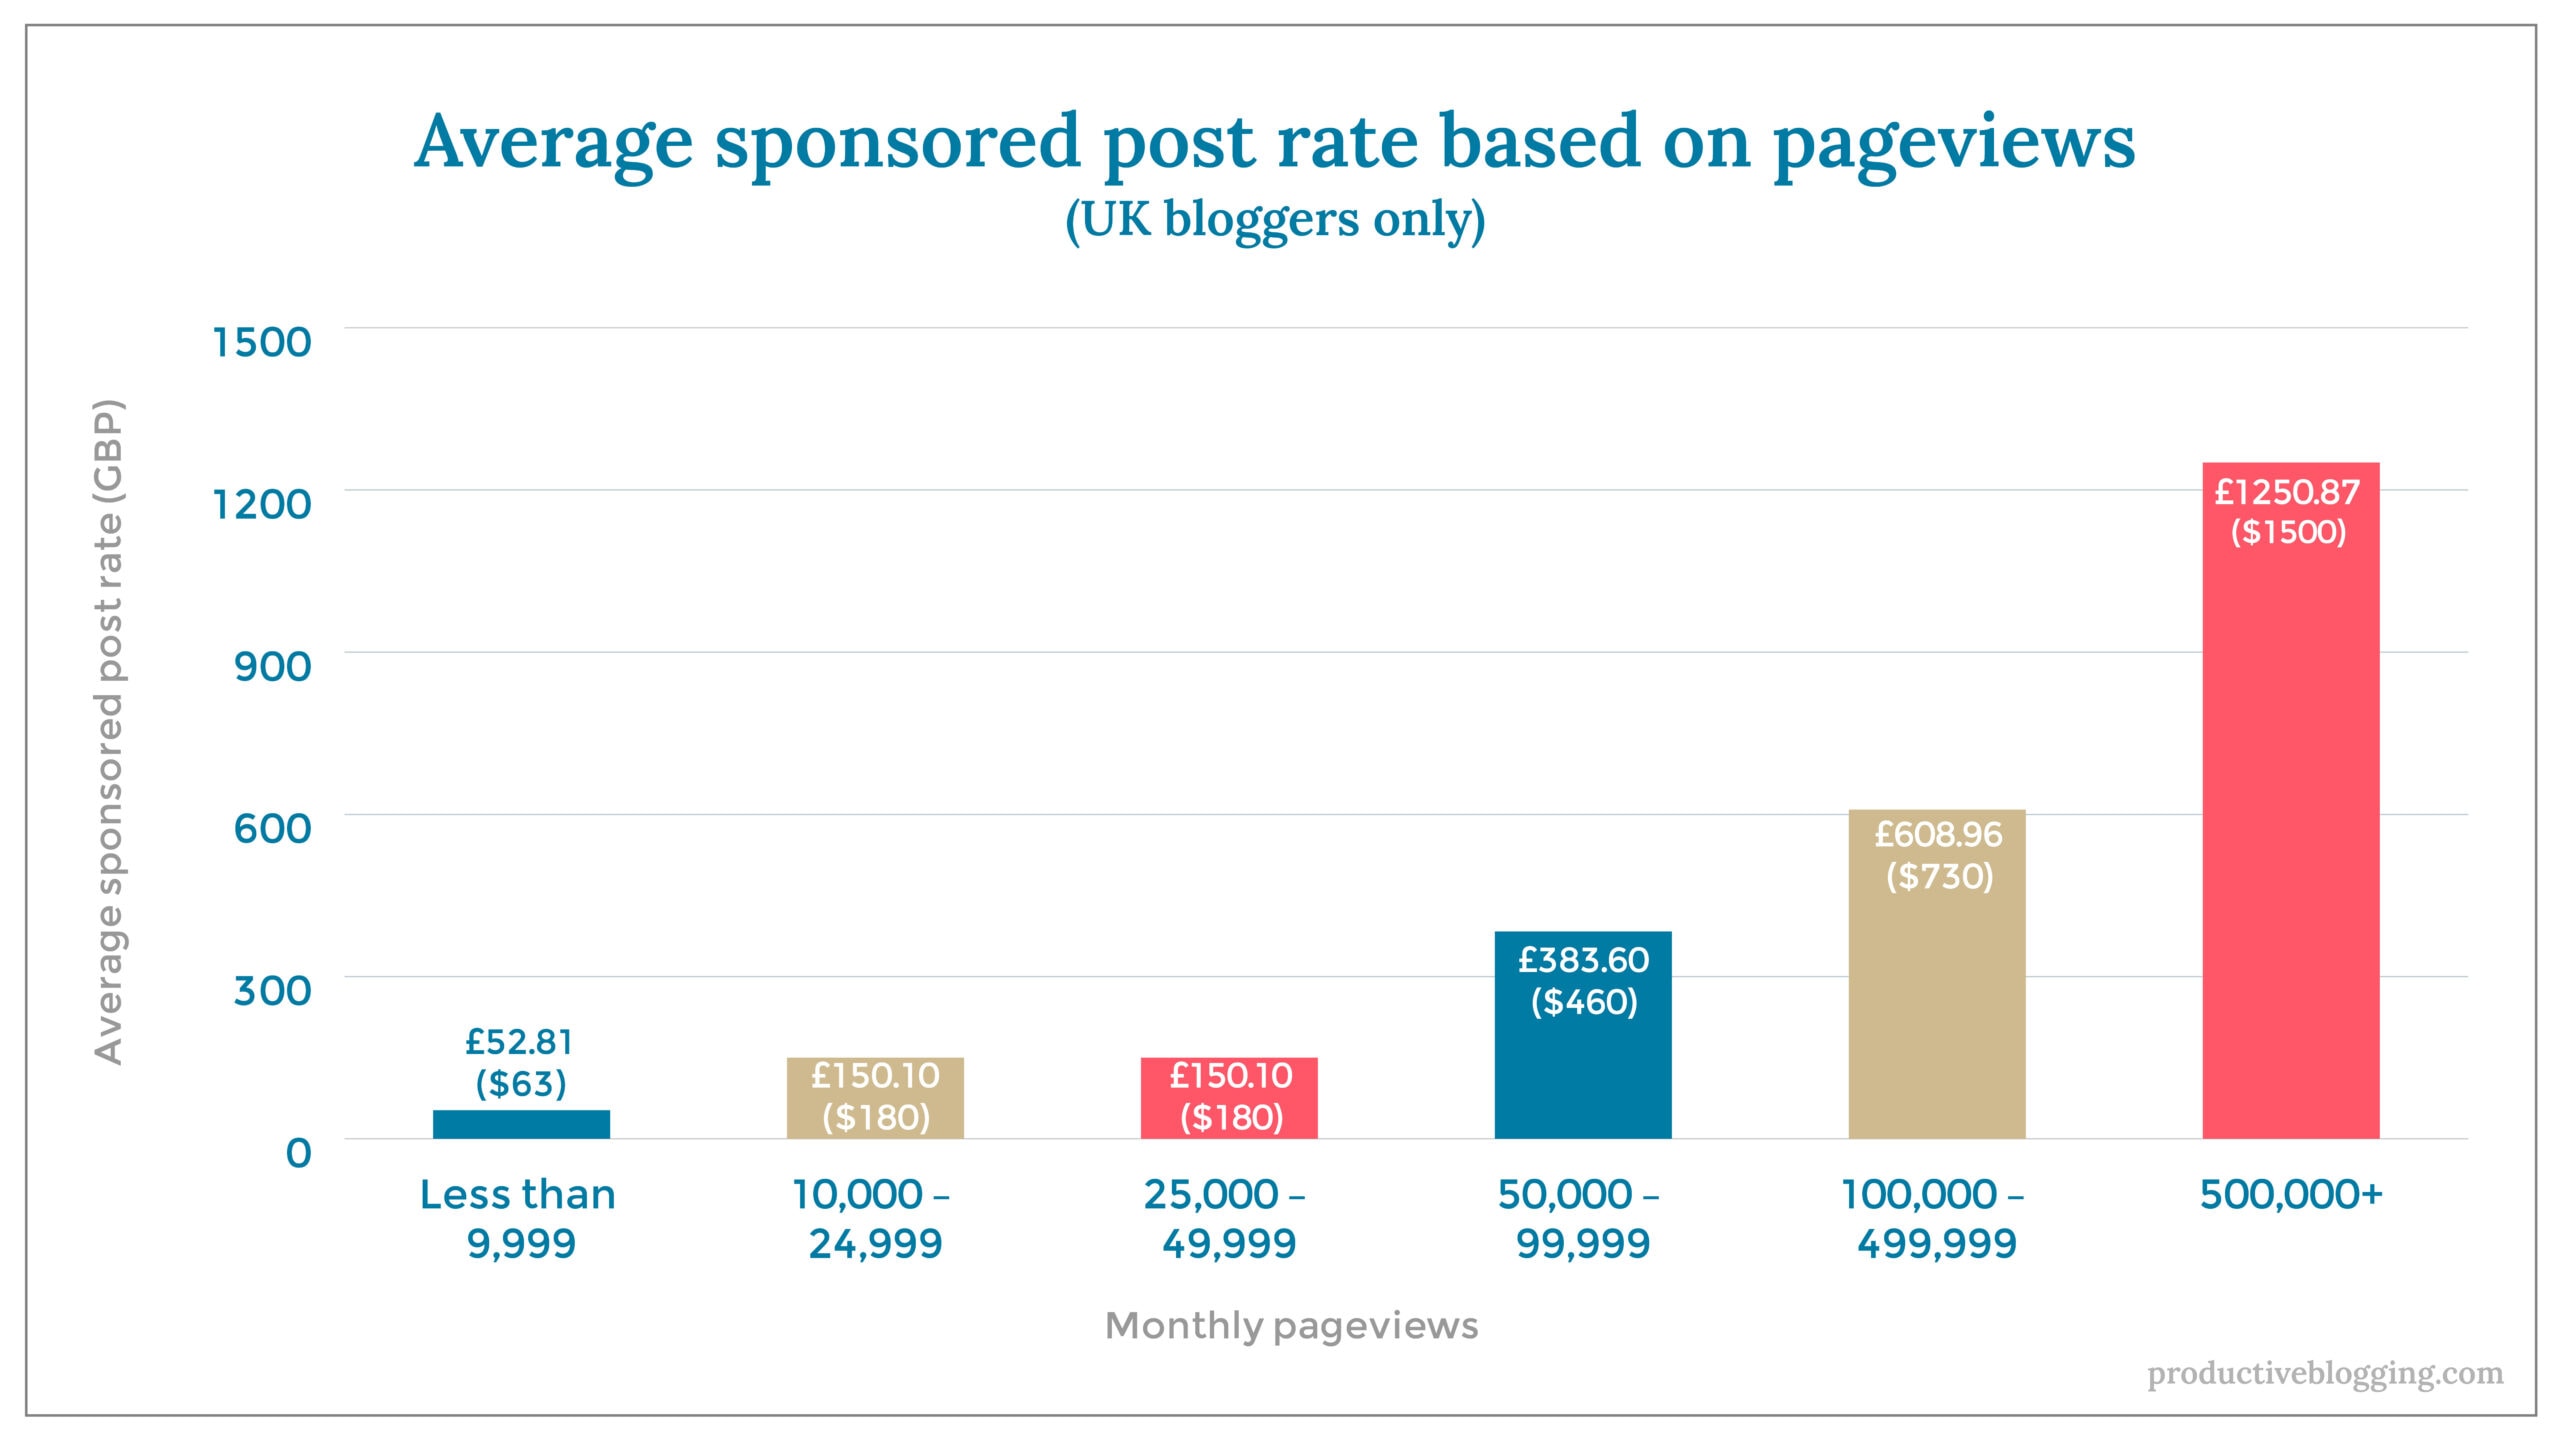 Average sponsored post rate based on pageviews (UK bloggers only)X axis: Monthly pageviewsY axis: Average sponsored post rate (GBP)Less than 9,999		£52.81 ($63)10,000 – 24,999		£150.10 ($180)25,000 – 49,999		£150.10 ($180)50,000 – 99,999		£383.60 ($460)100,000 – 499,999	£608.96 ($730)500,000+		£1250.87 ($1500)